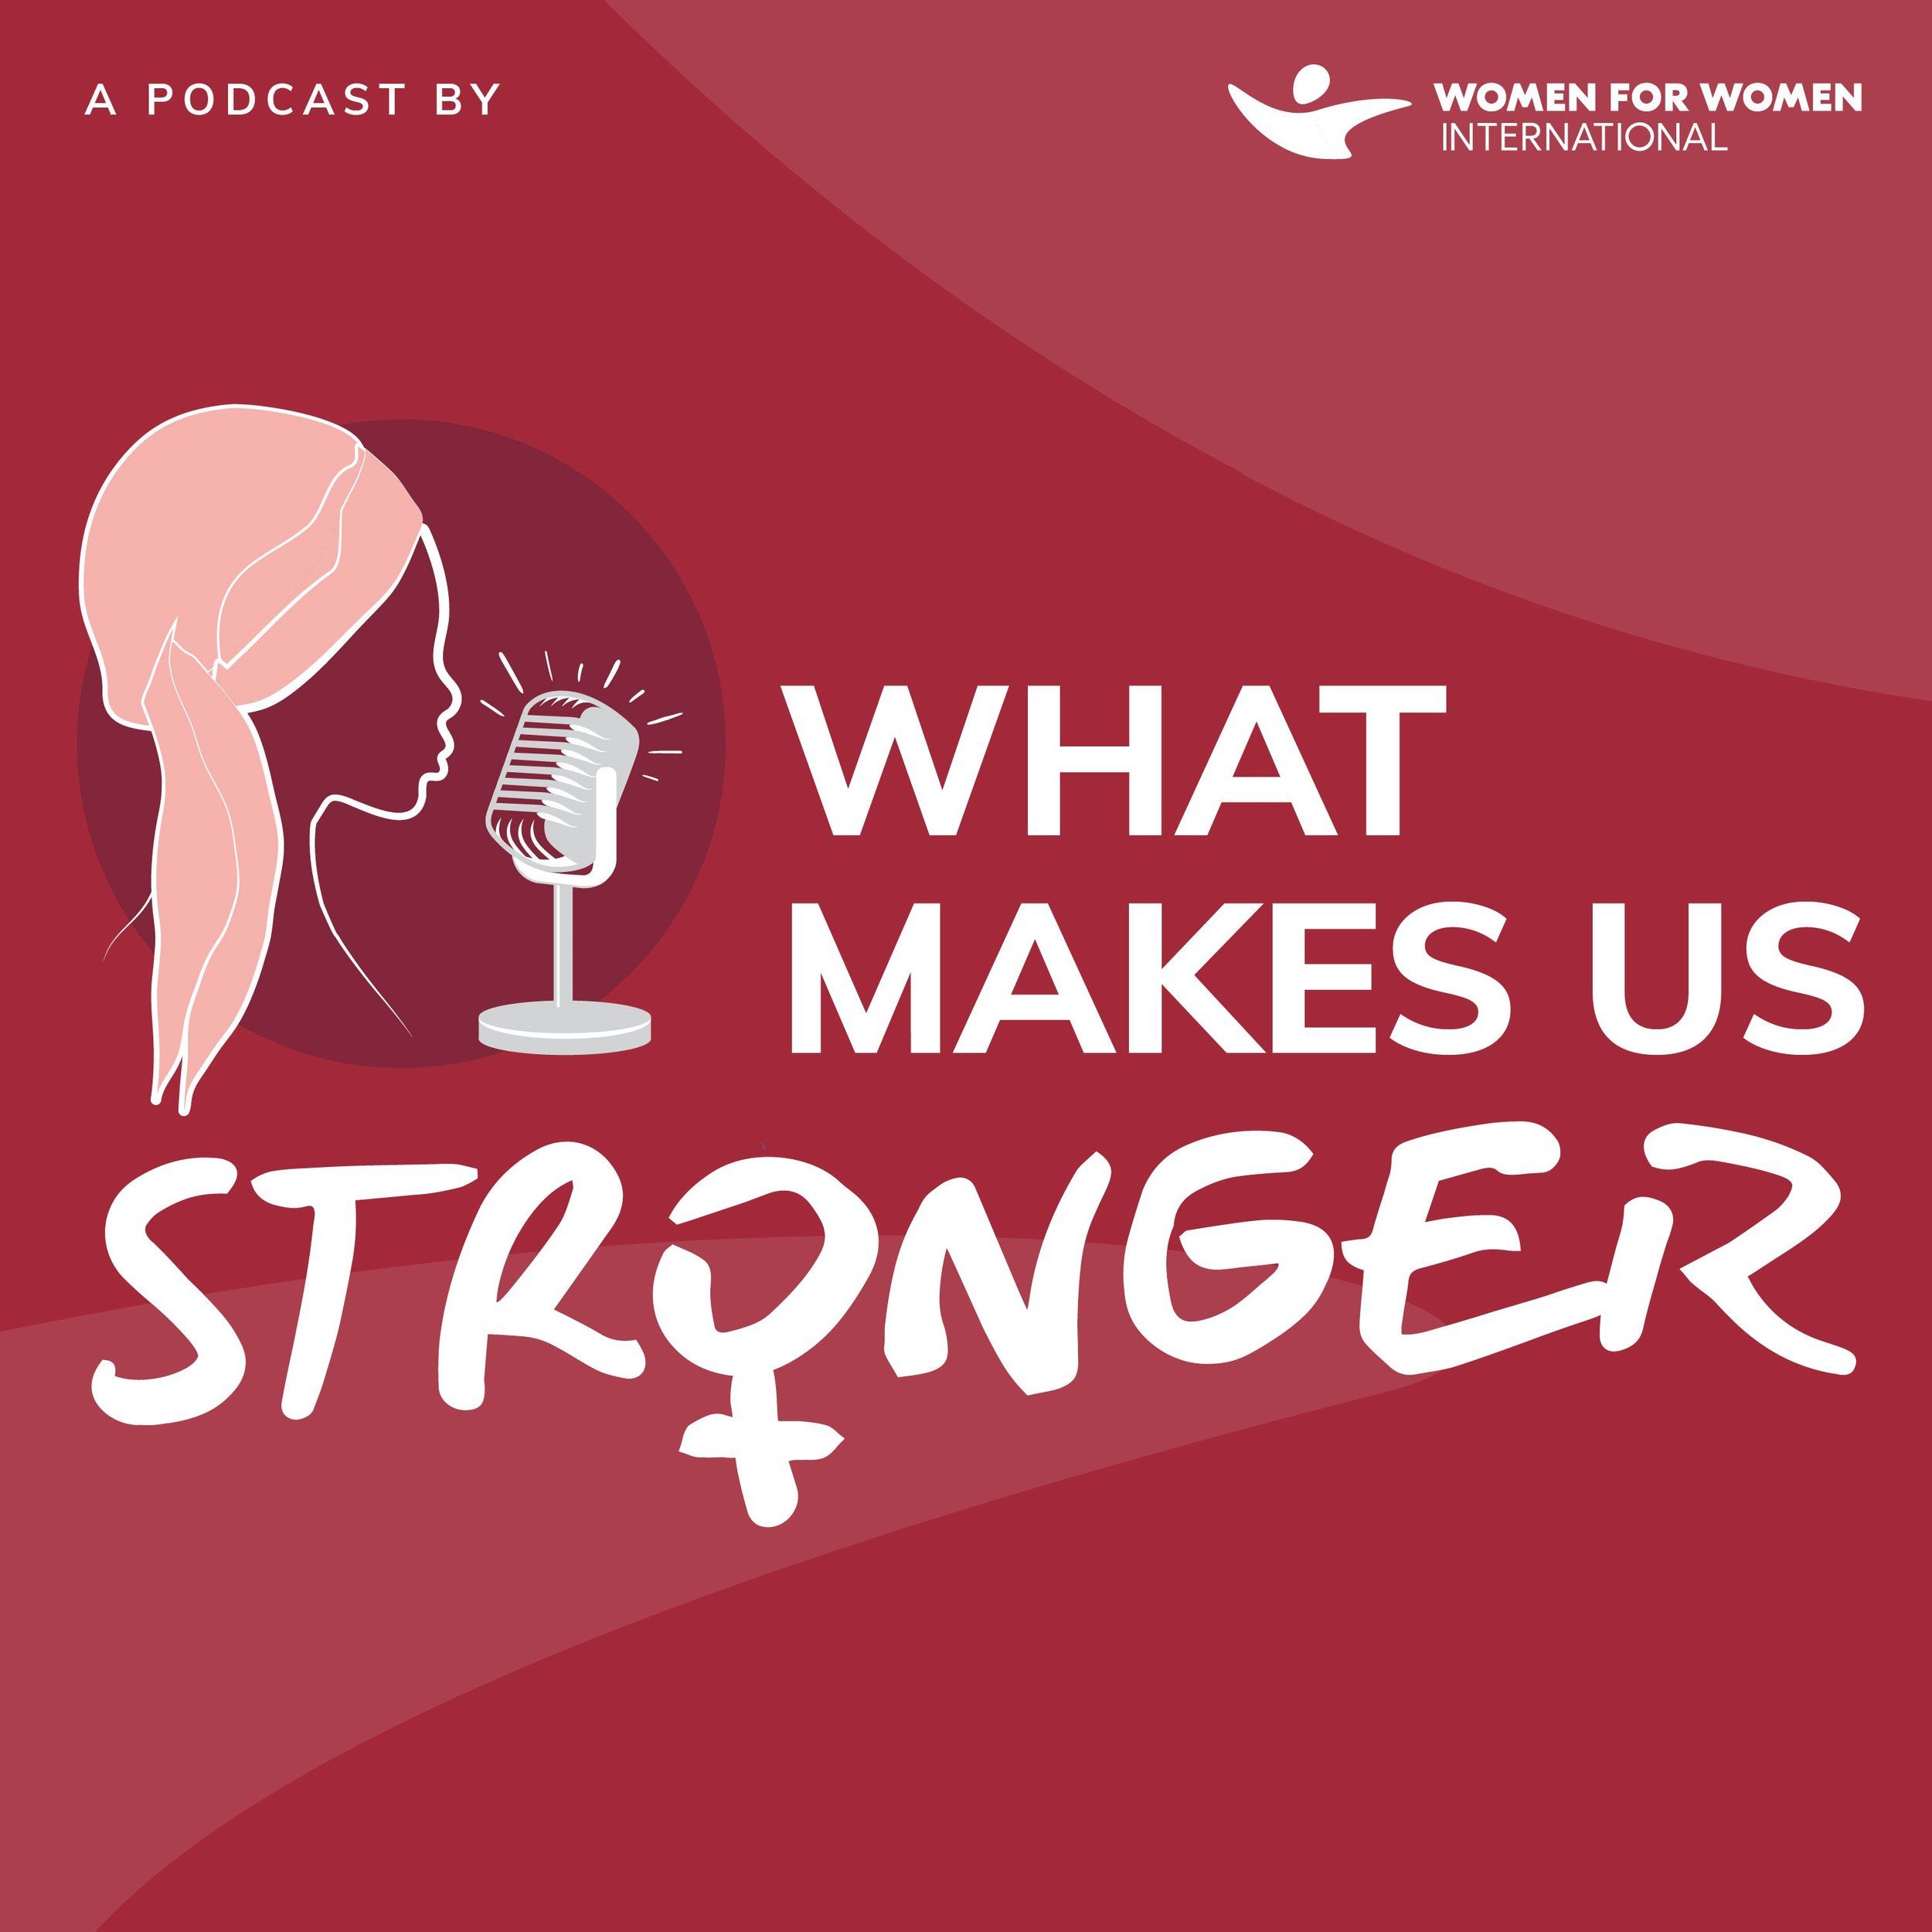 What Makes Us Stronger Podcast